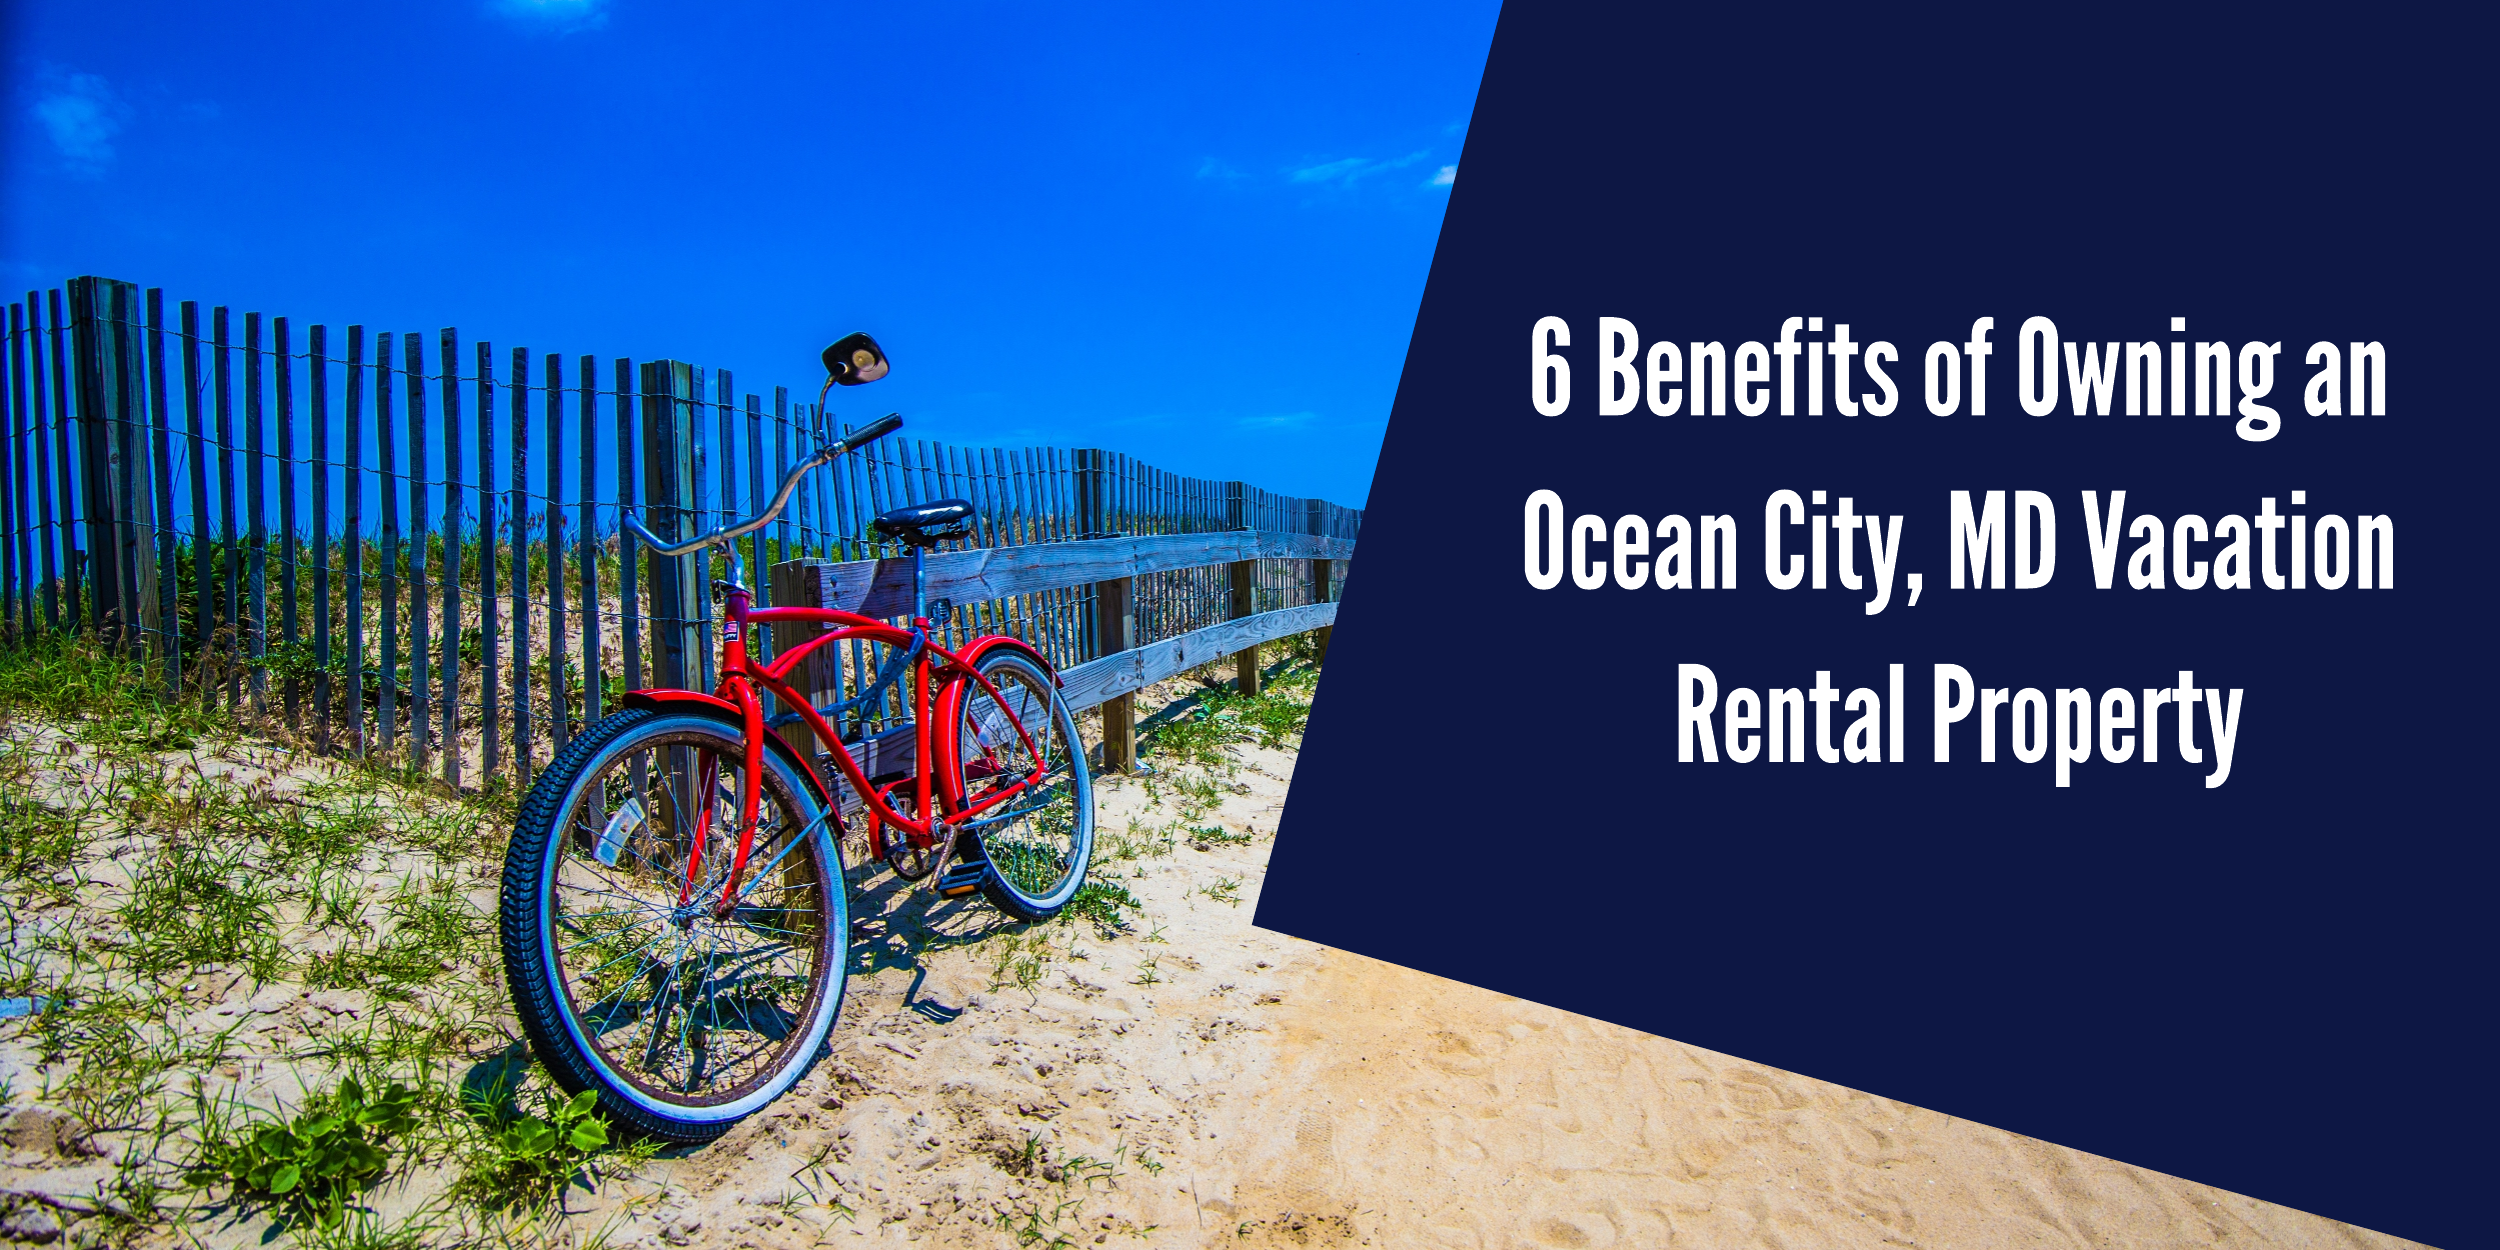 6 Benefits of Owning a Vacation Rental in Ocean City, MD